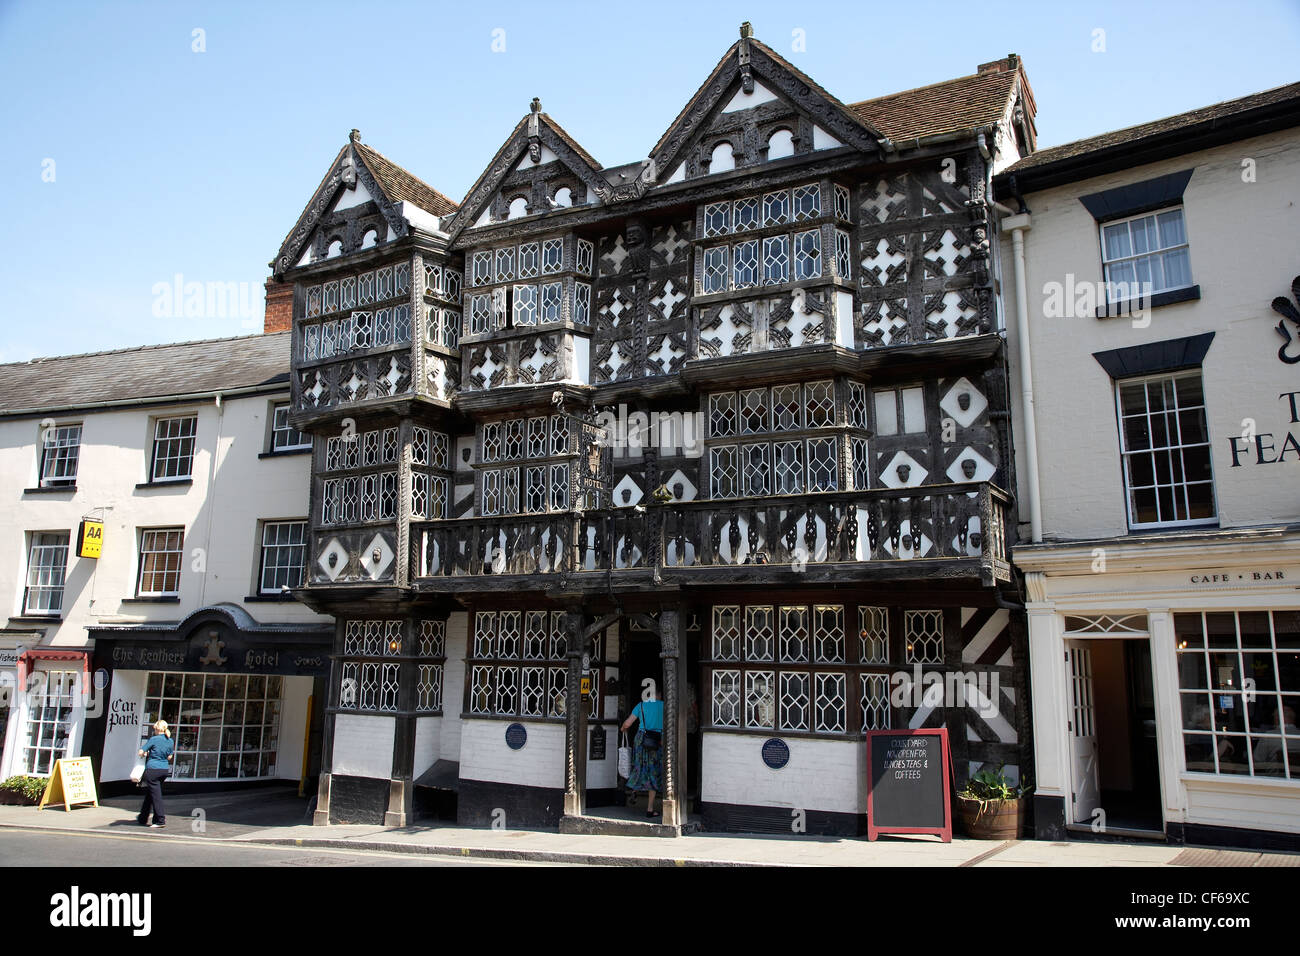 Exterior view of the historic Feathers Hotel in Ludlow. Stock Photo